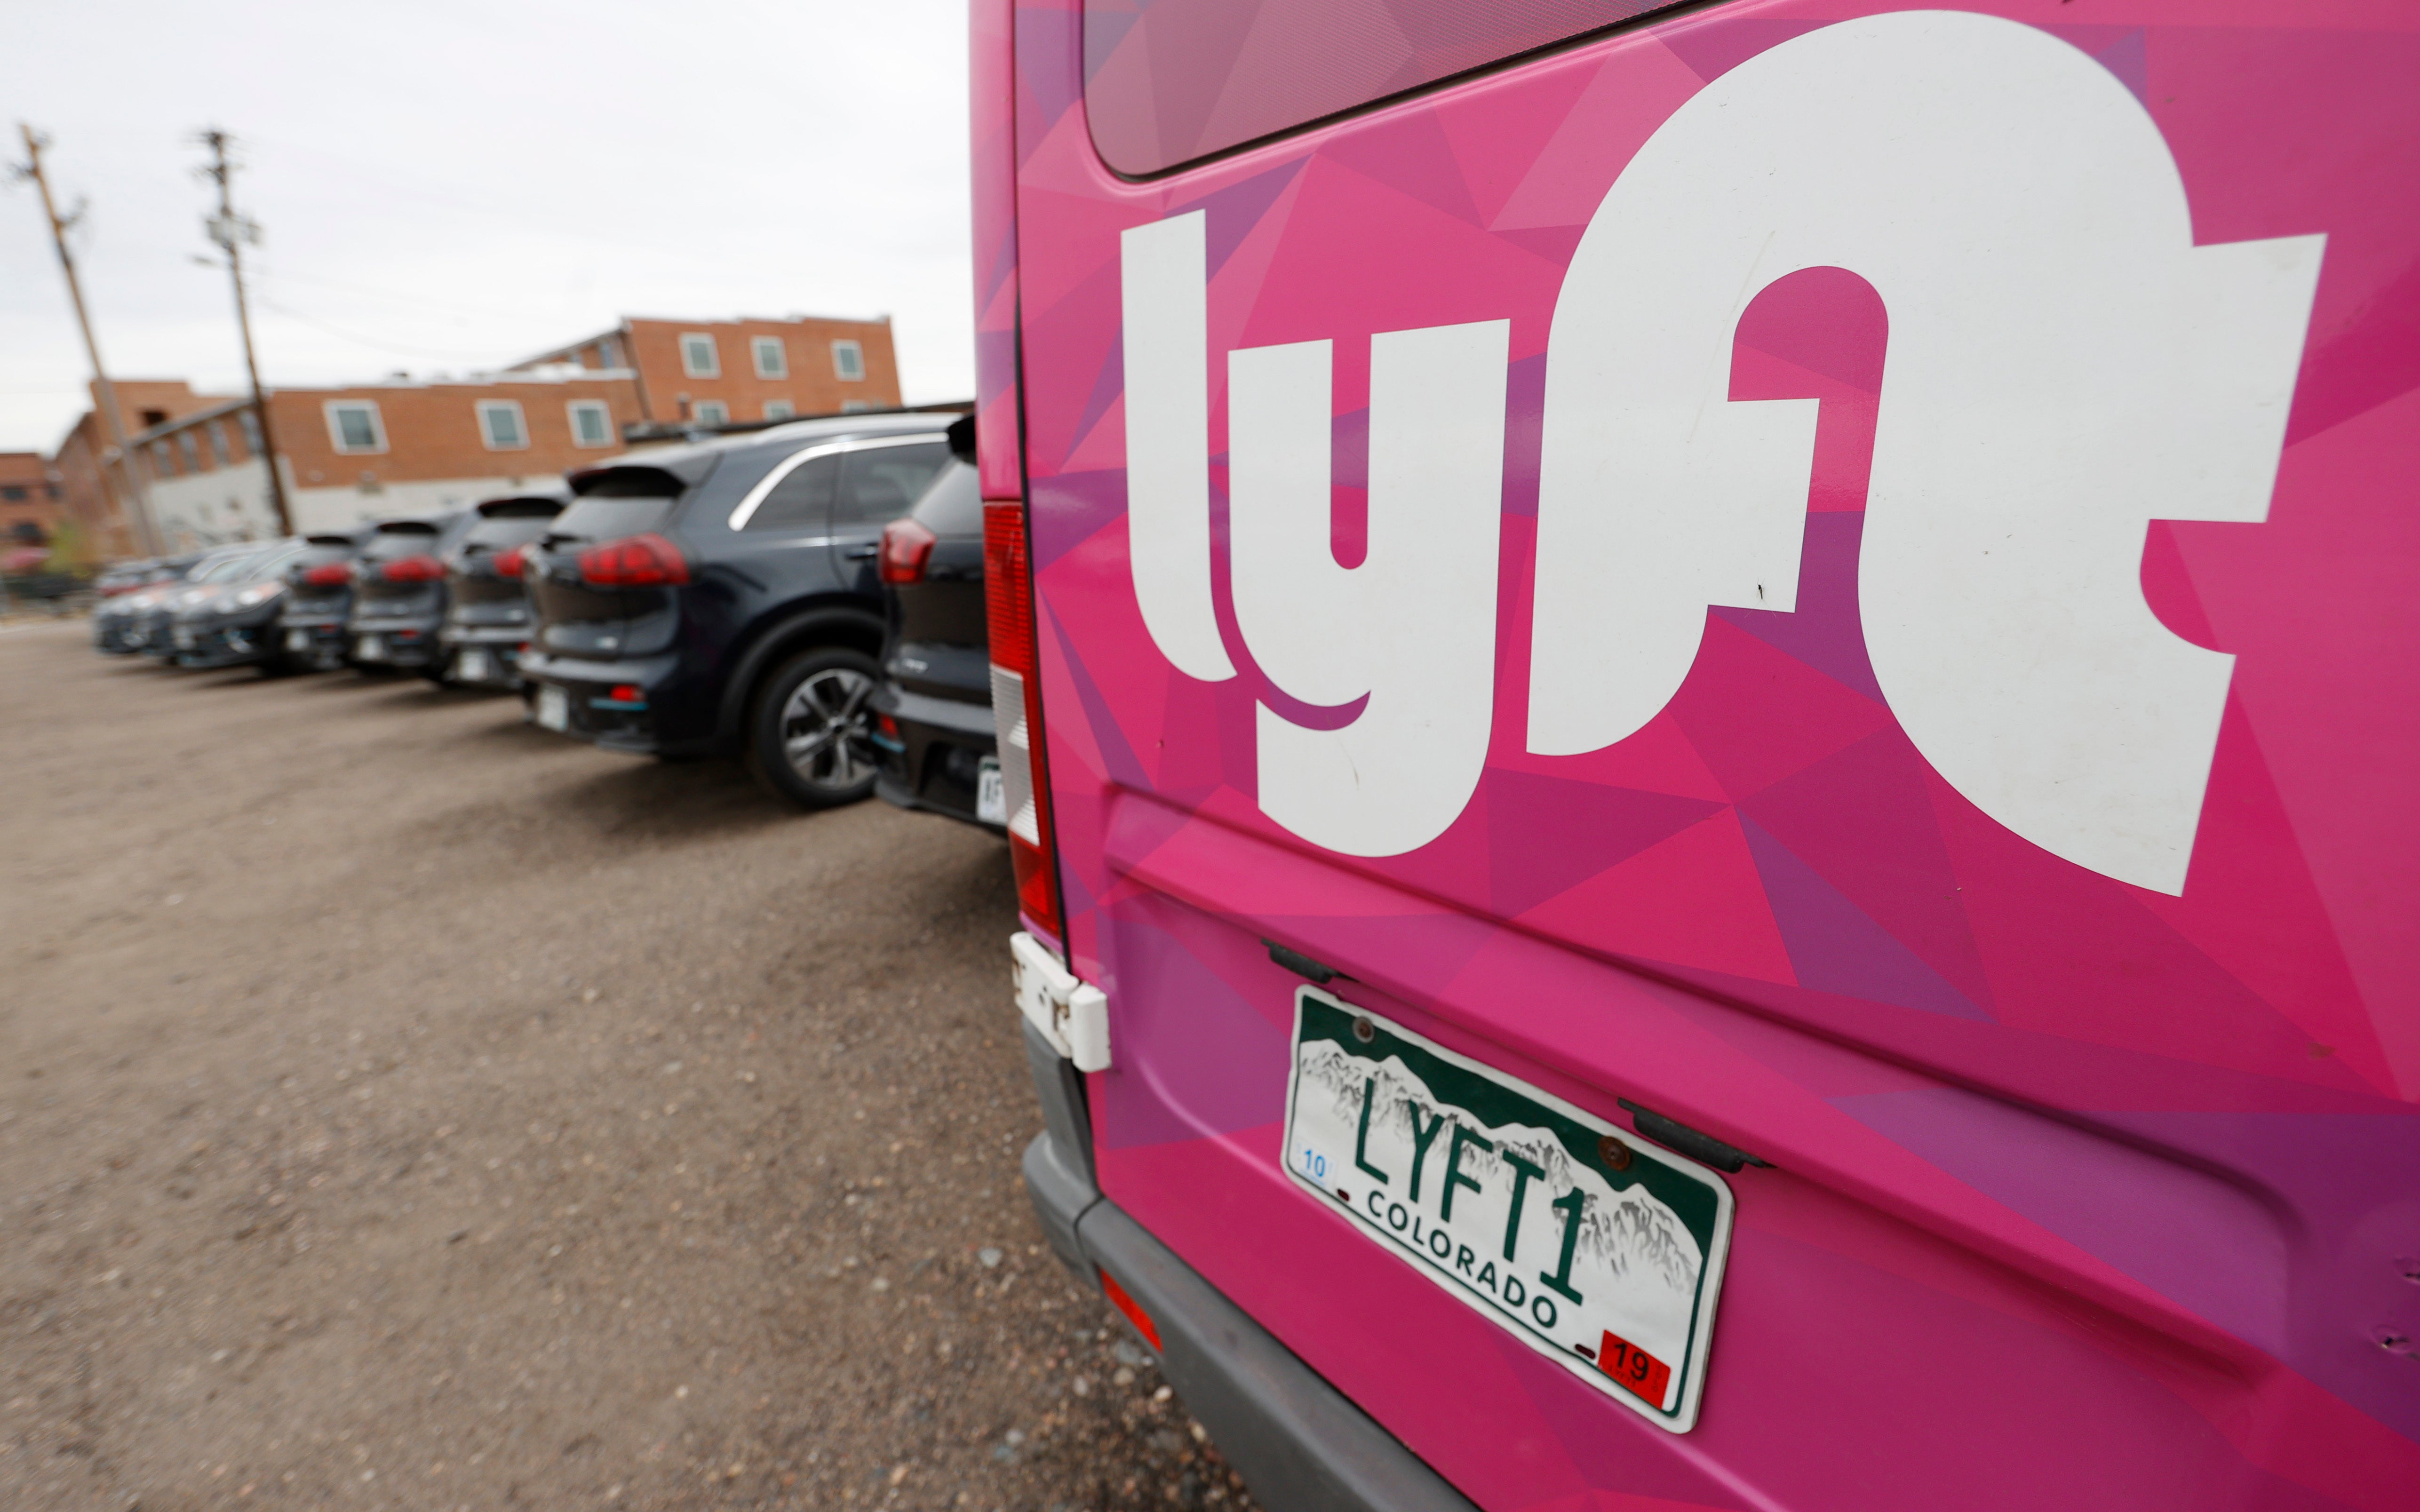 Representative: Lyft lauded the driver, James Bode, for his handling of the incident